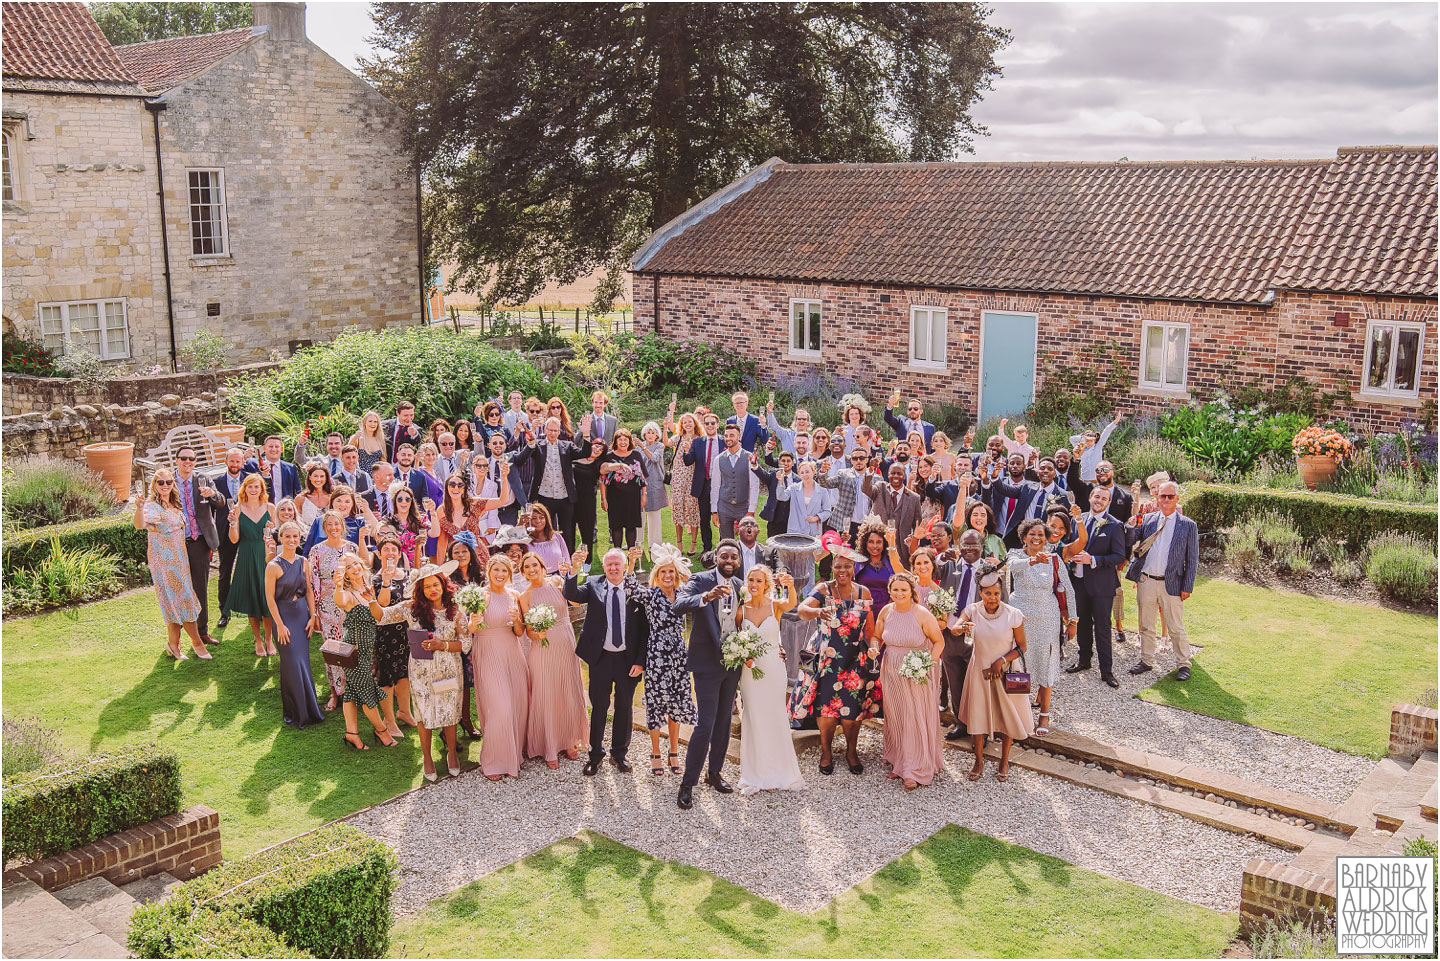 Awesome group photos, Priory Cottages wedding